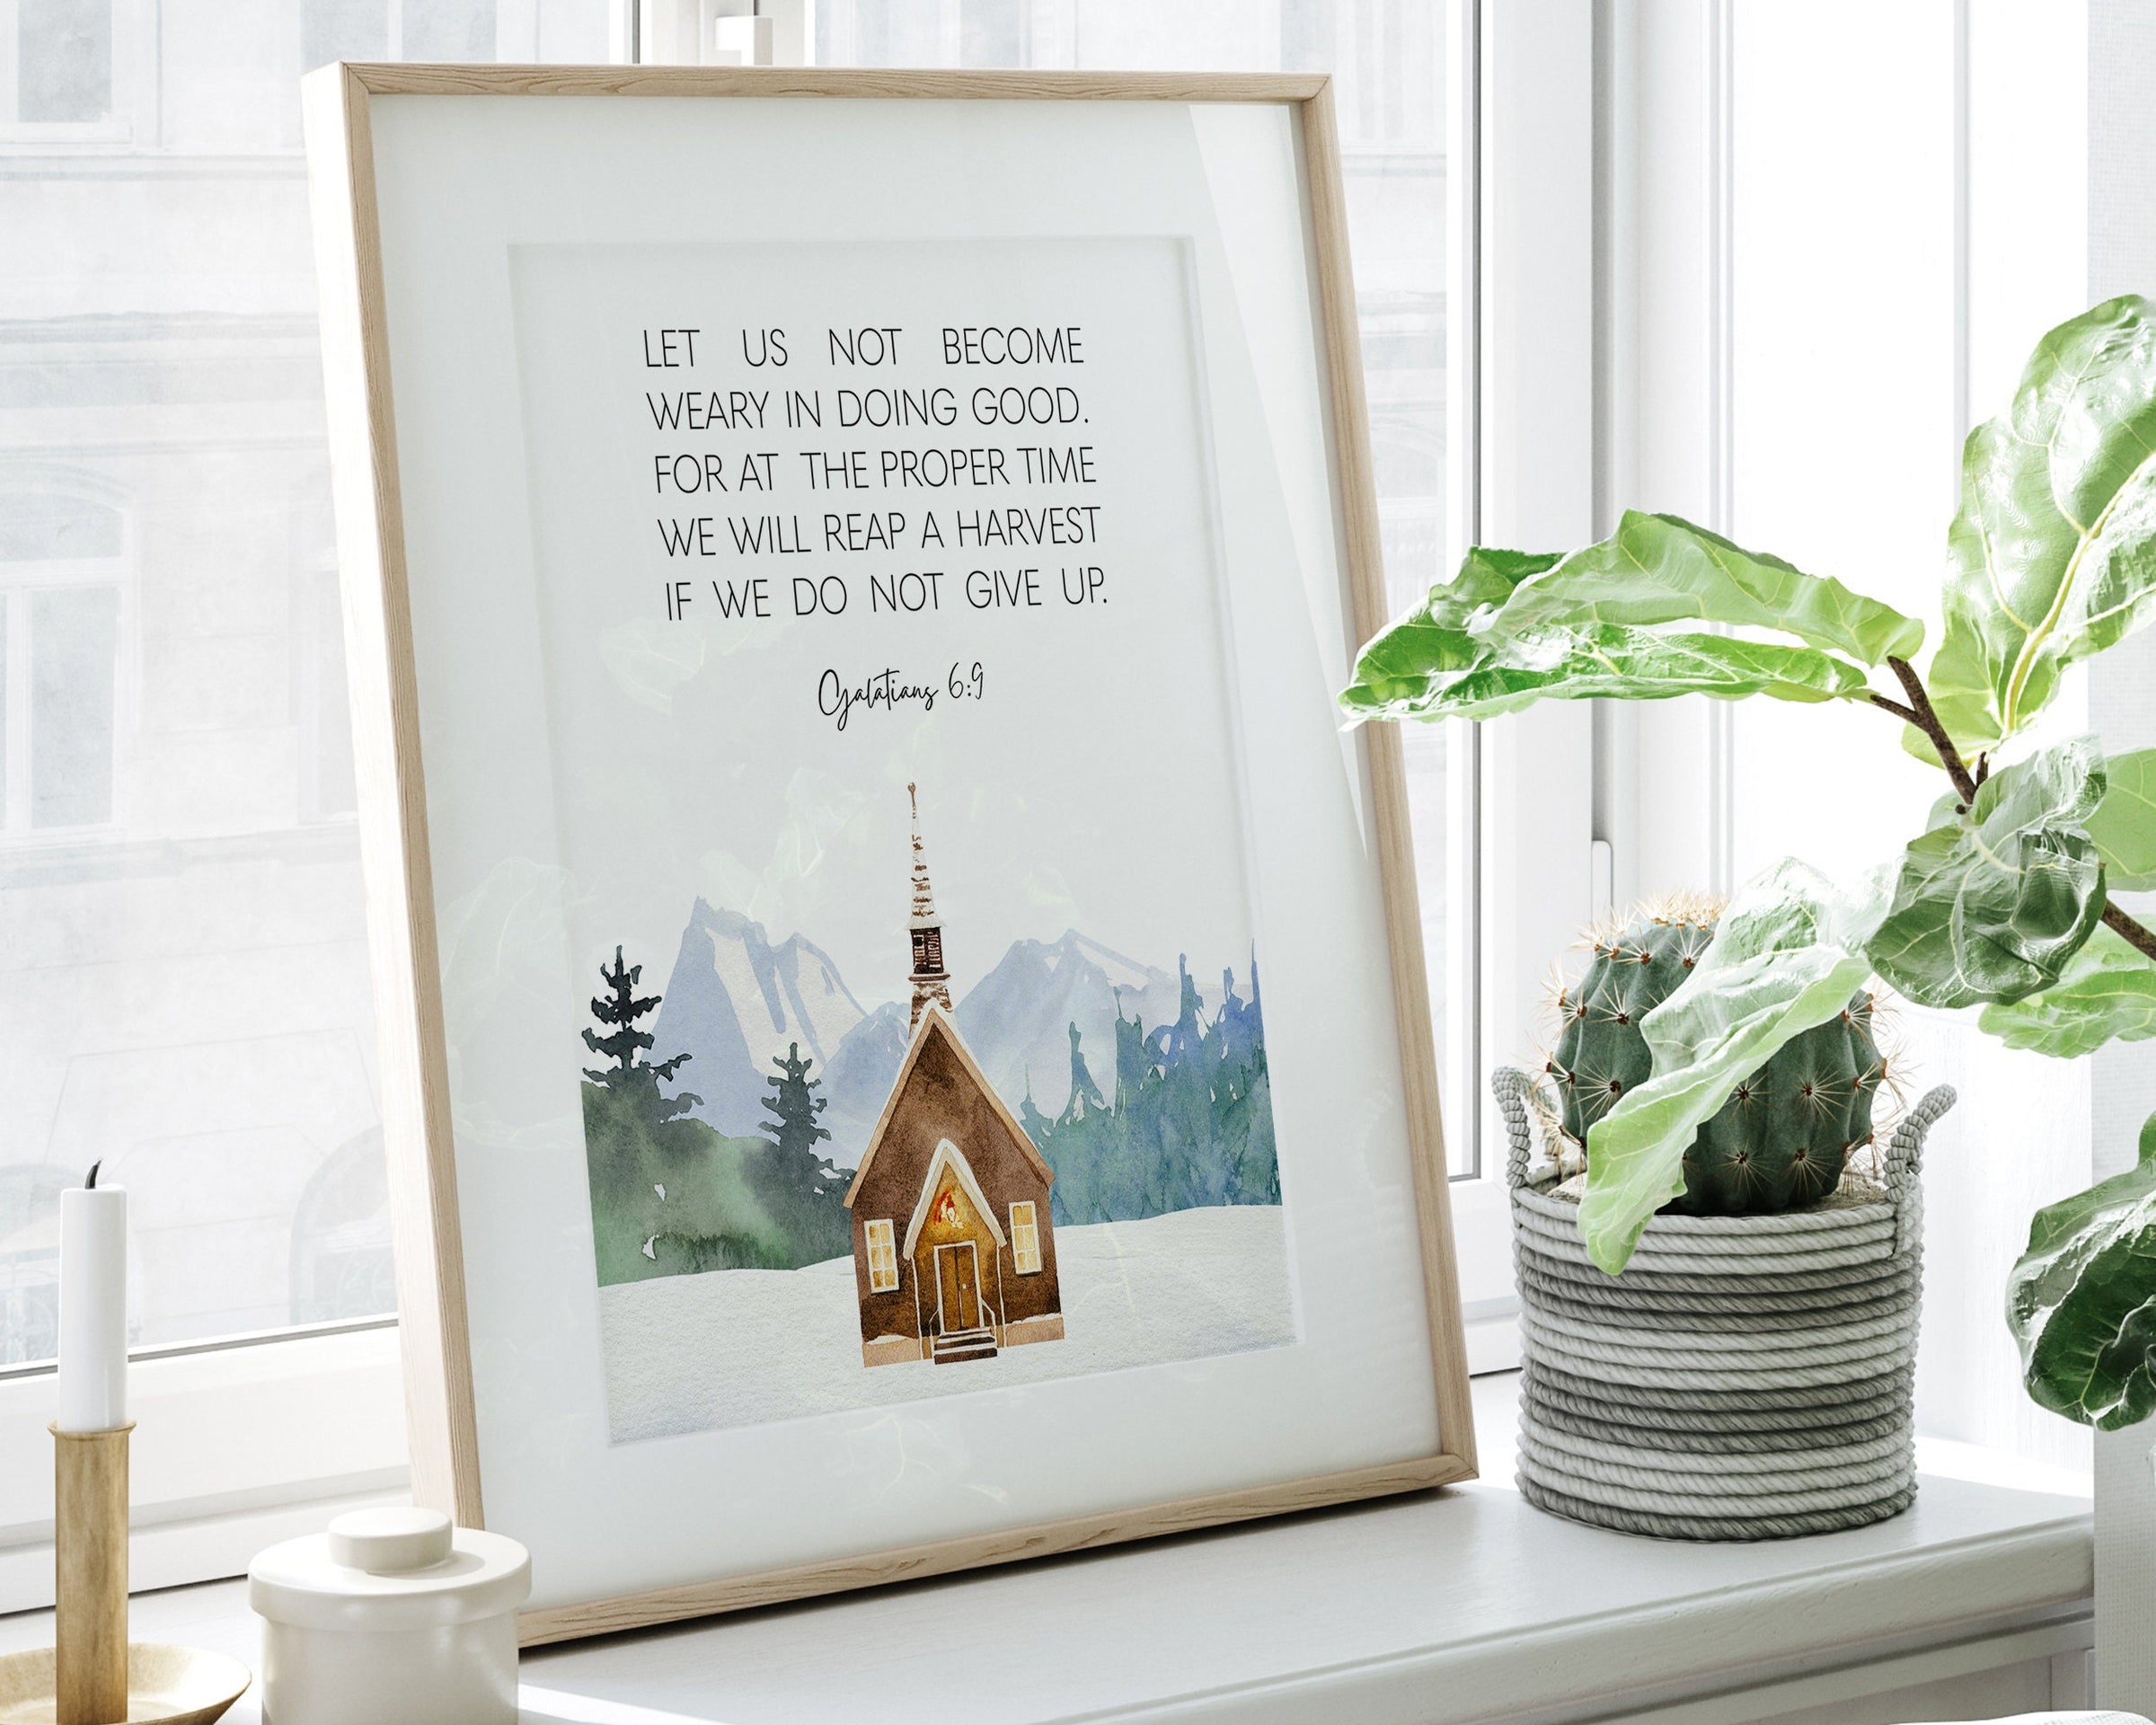 Art Print for Galatians 6:9 by Dwell on Sunday School Zone